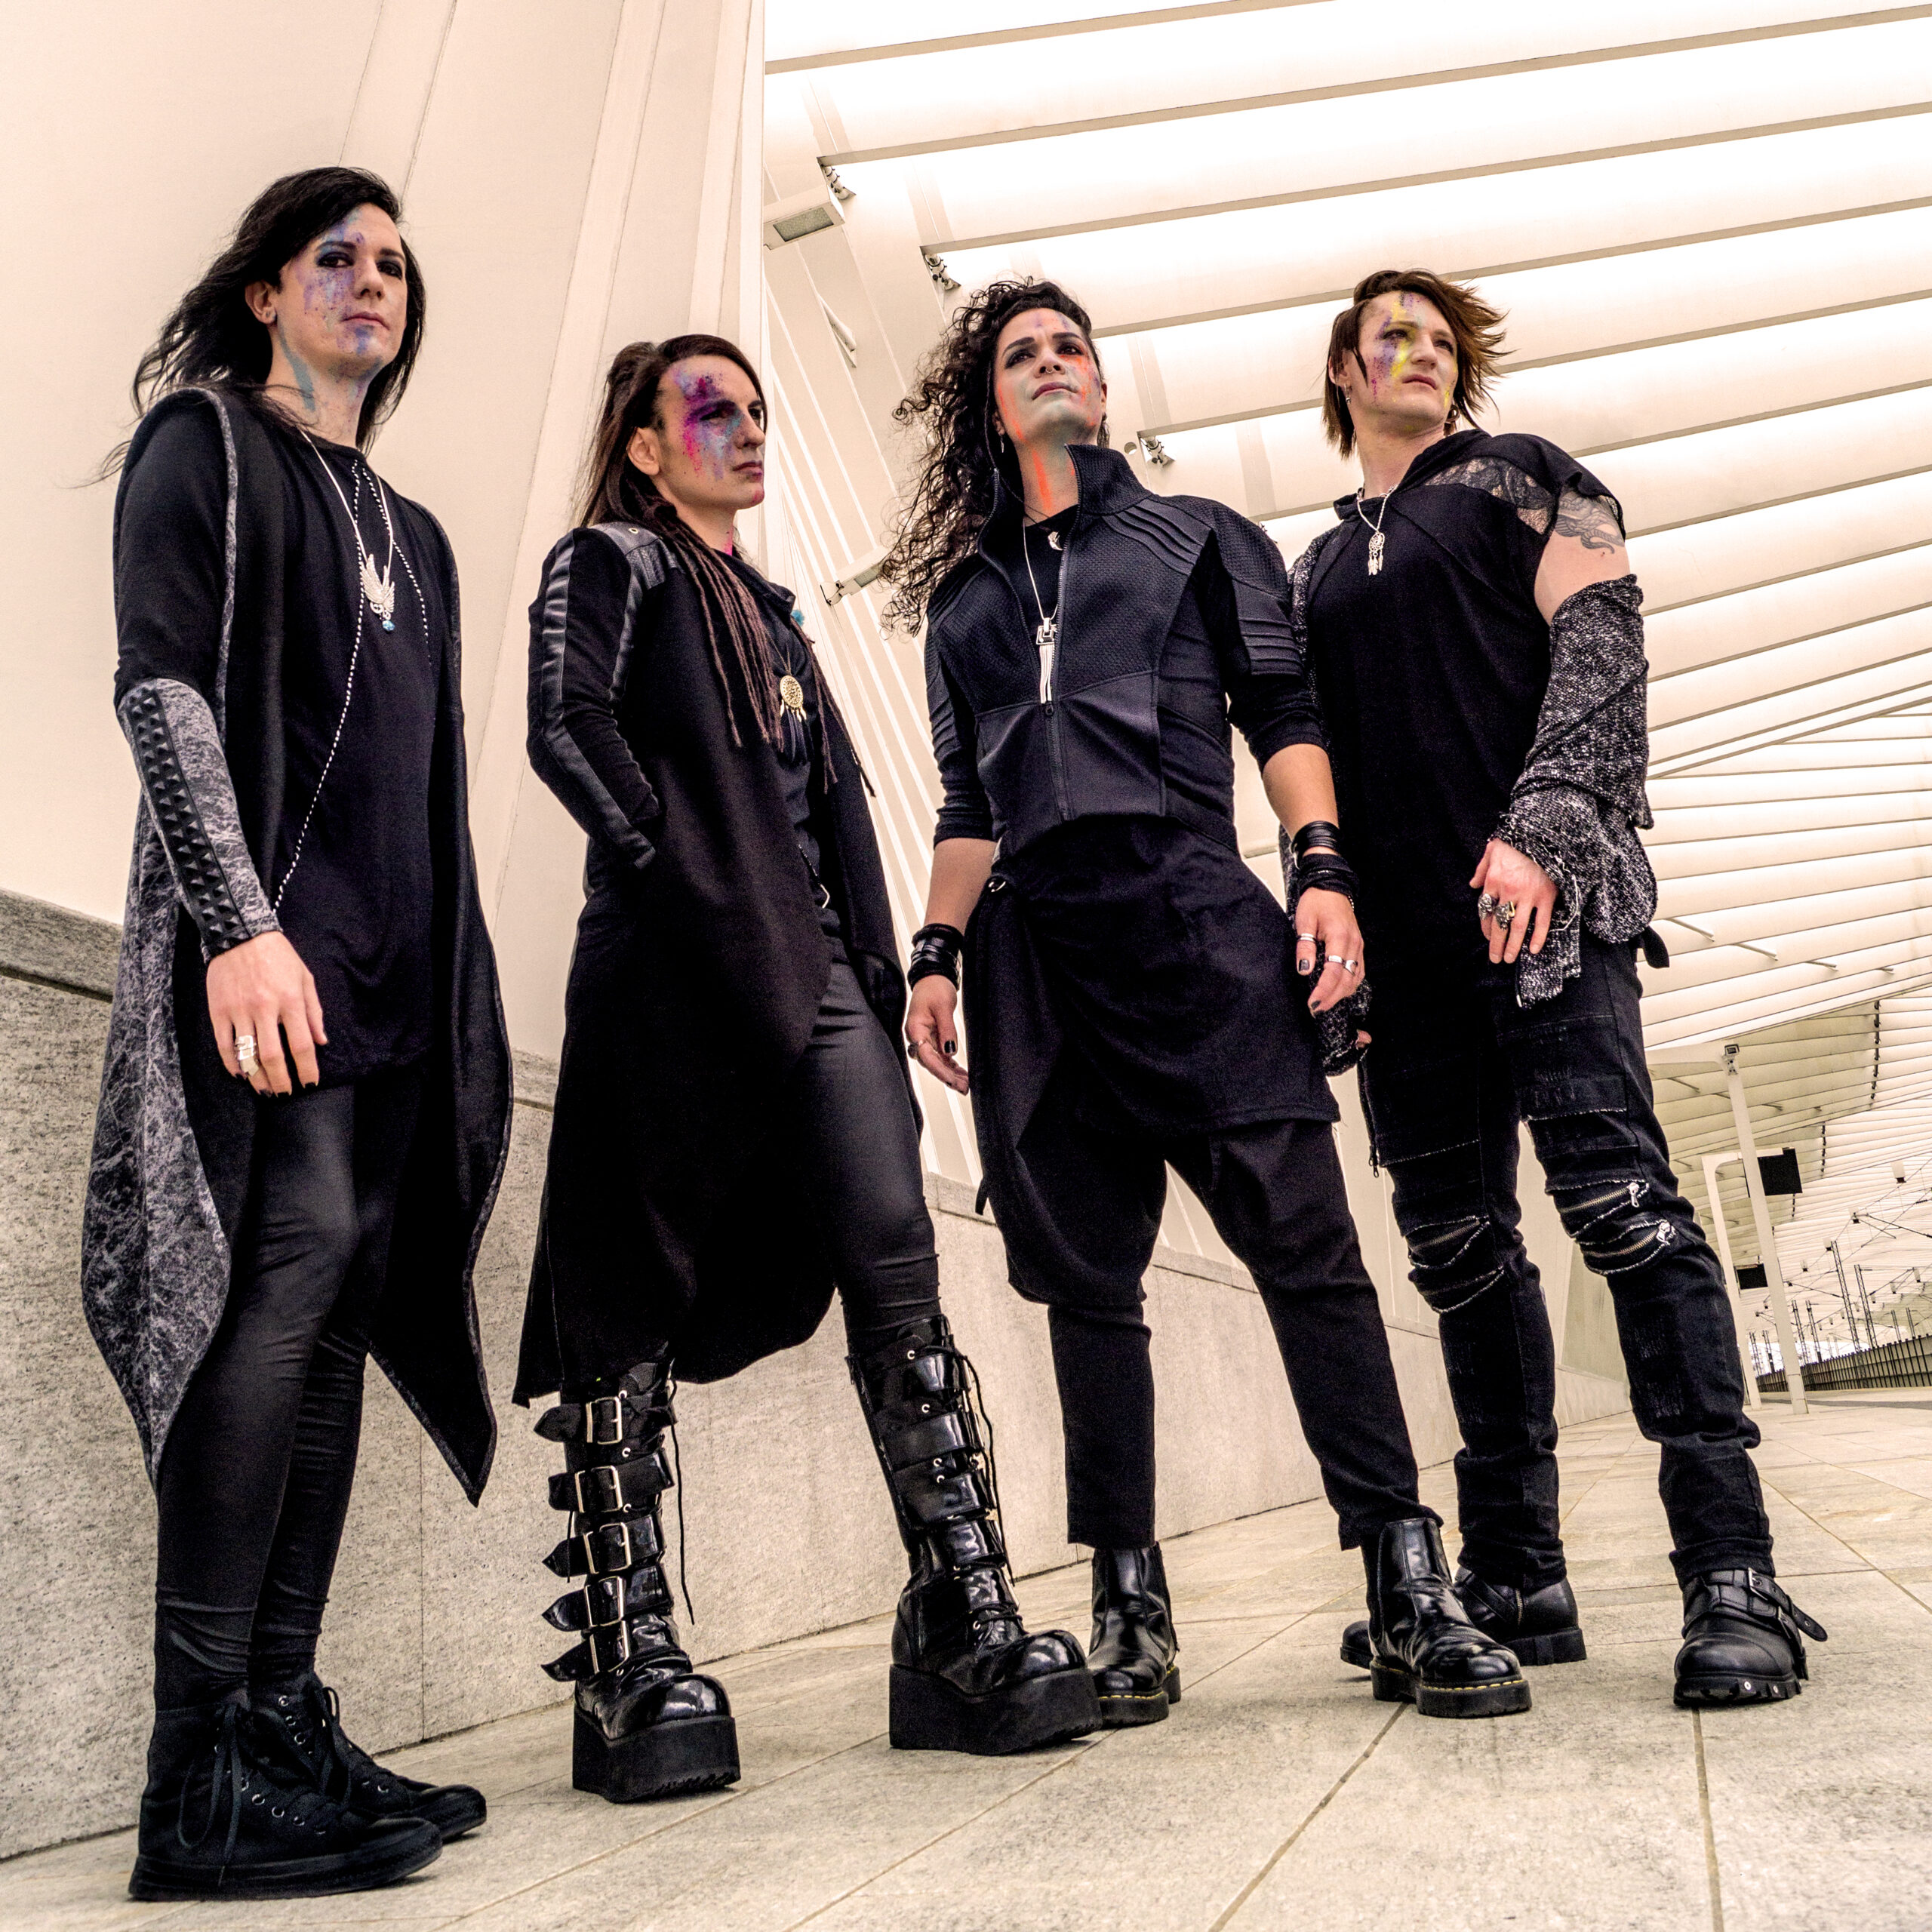 The Rock Band DNR pays homage to “Okuto no Ken” and goes on tour!